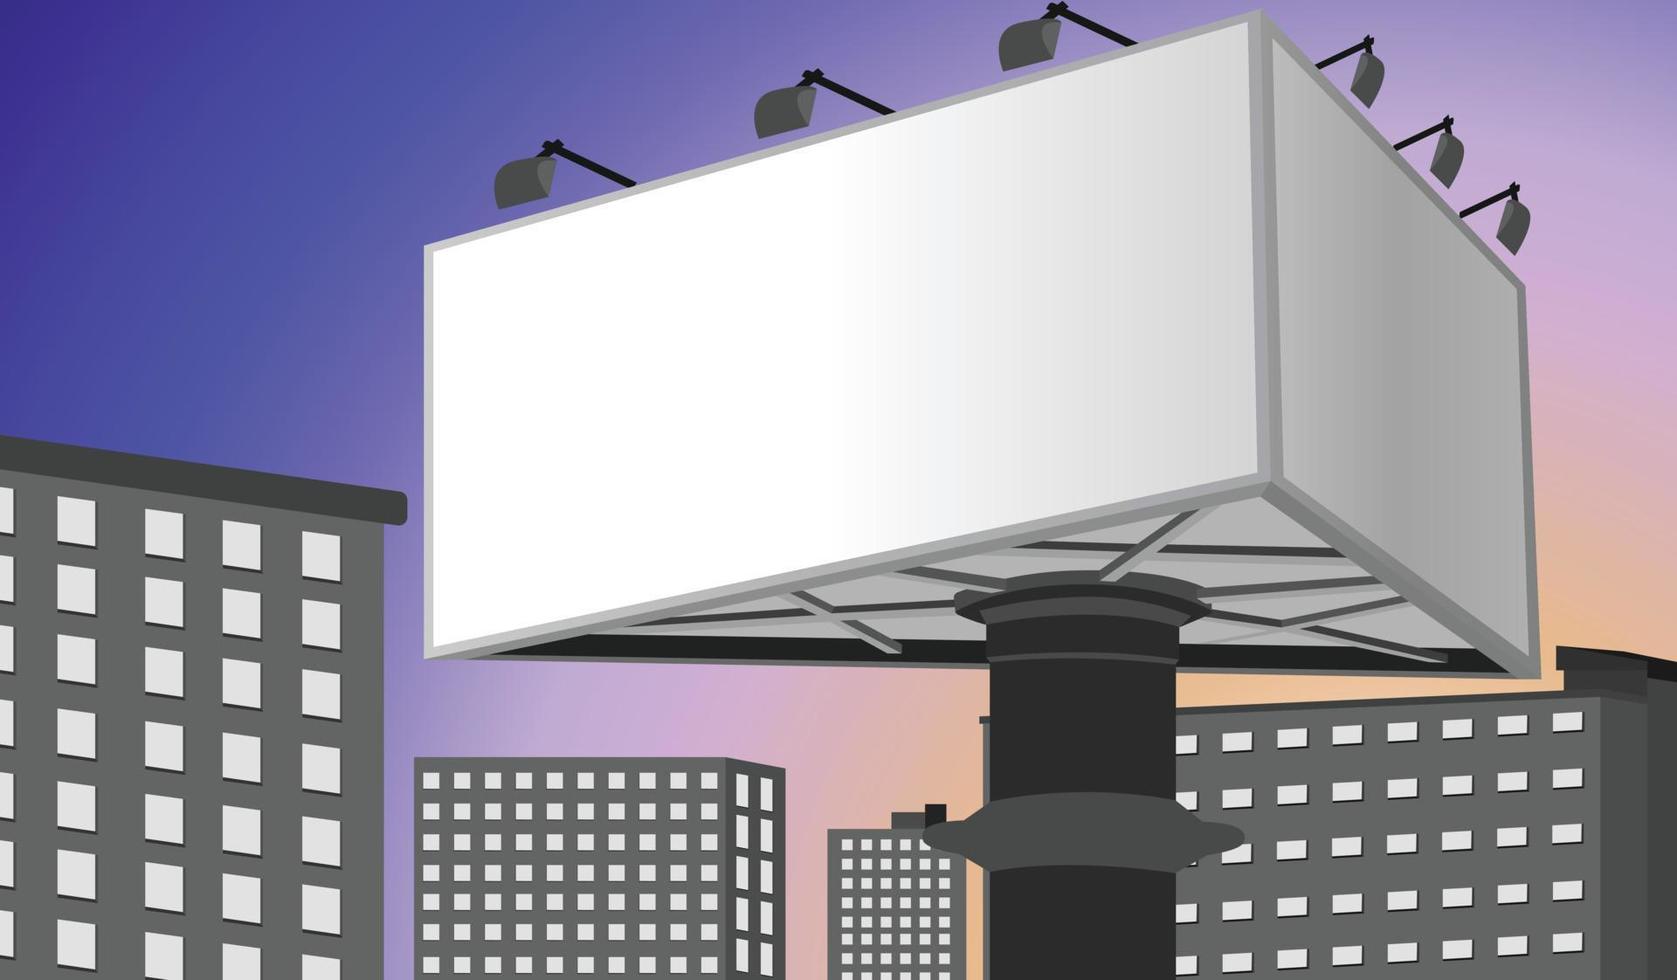 Billboard at the city and twilight sky background for copy space. flat design urban vector illustration. copy space mockup template display